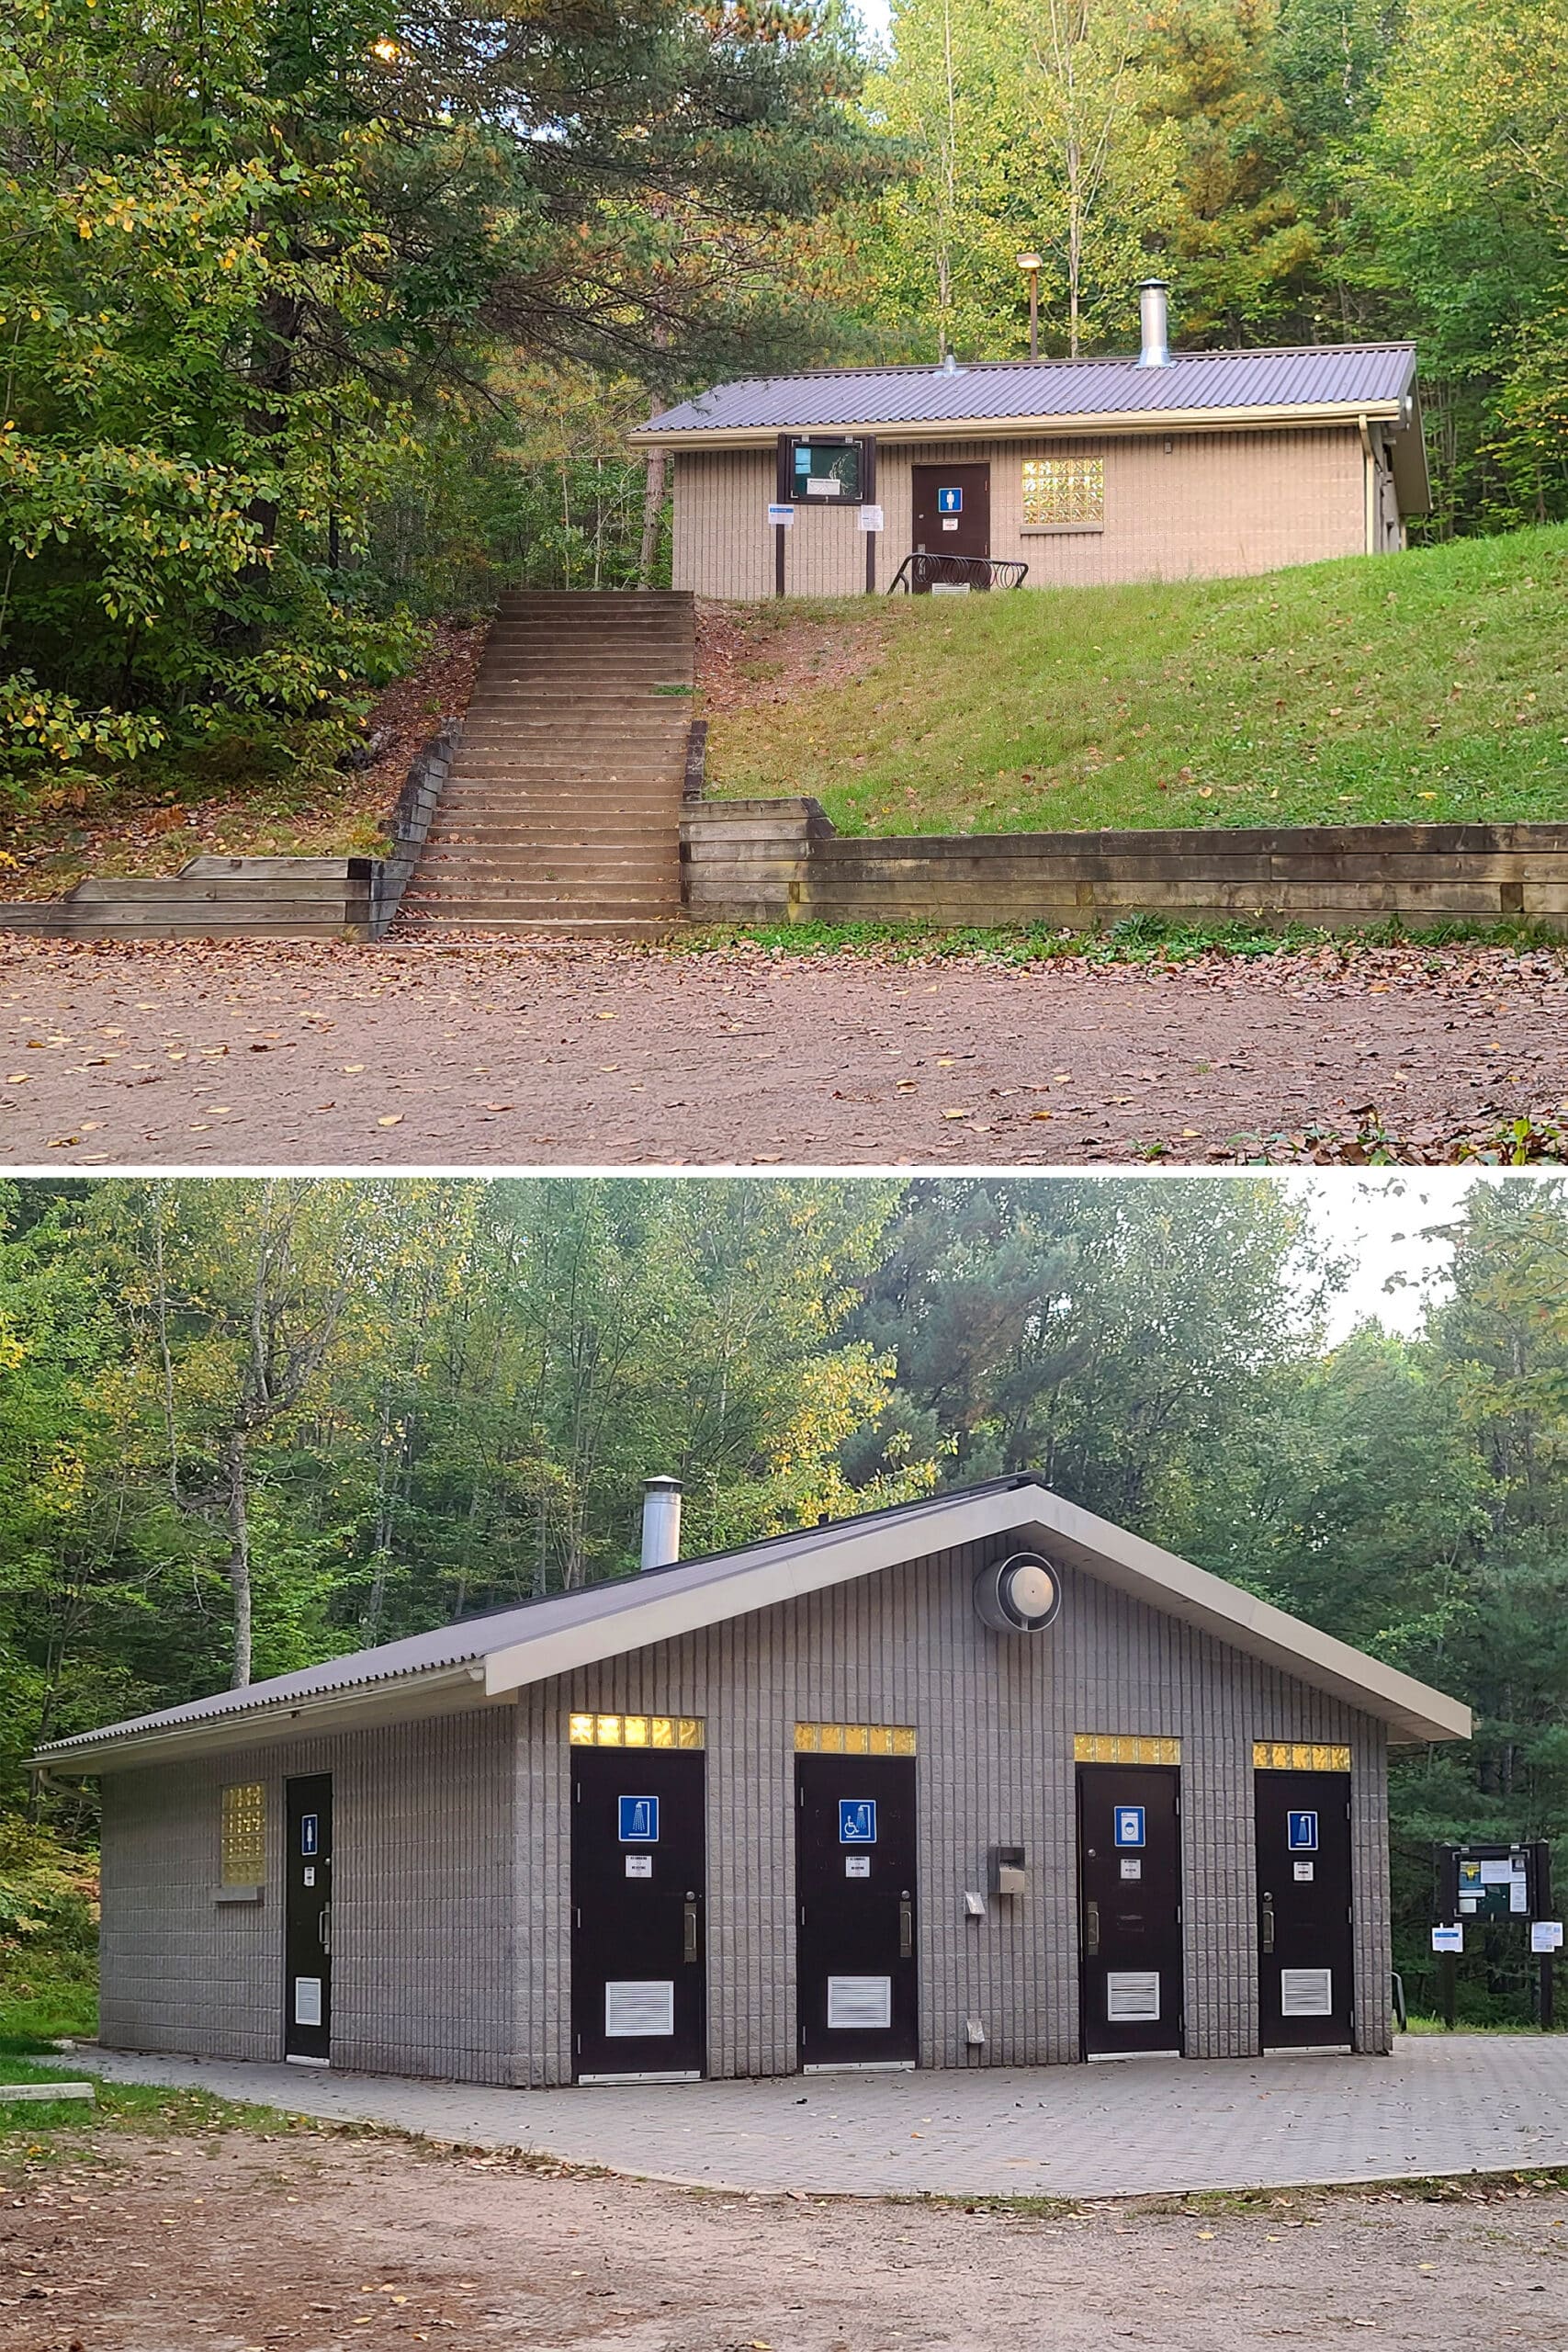 2 part image showing the two different entries to the Driftwood comfort station.